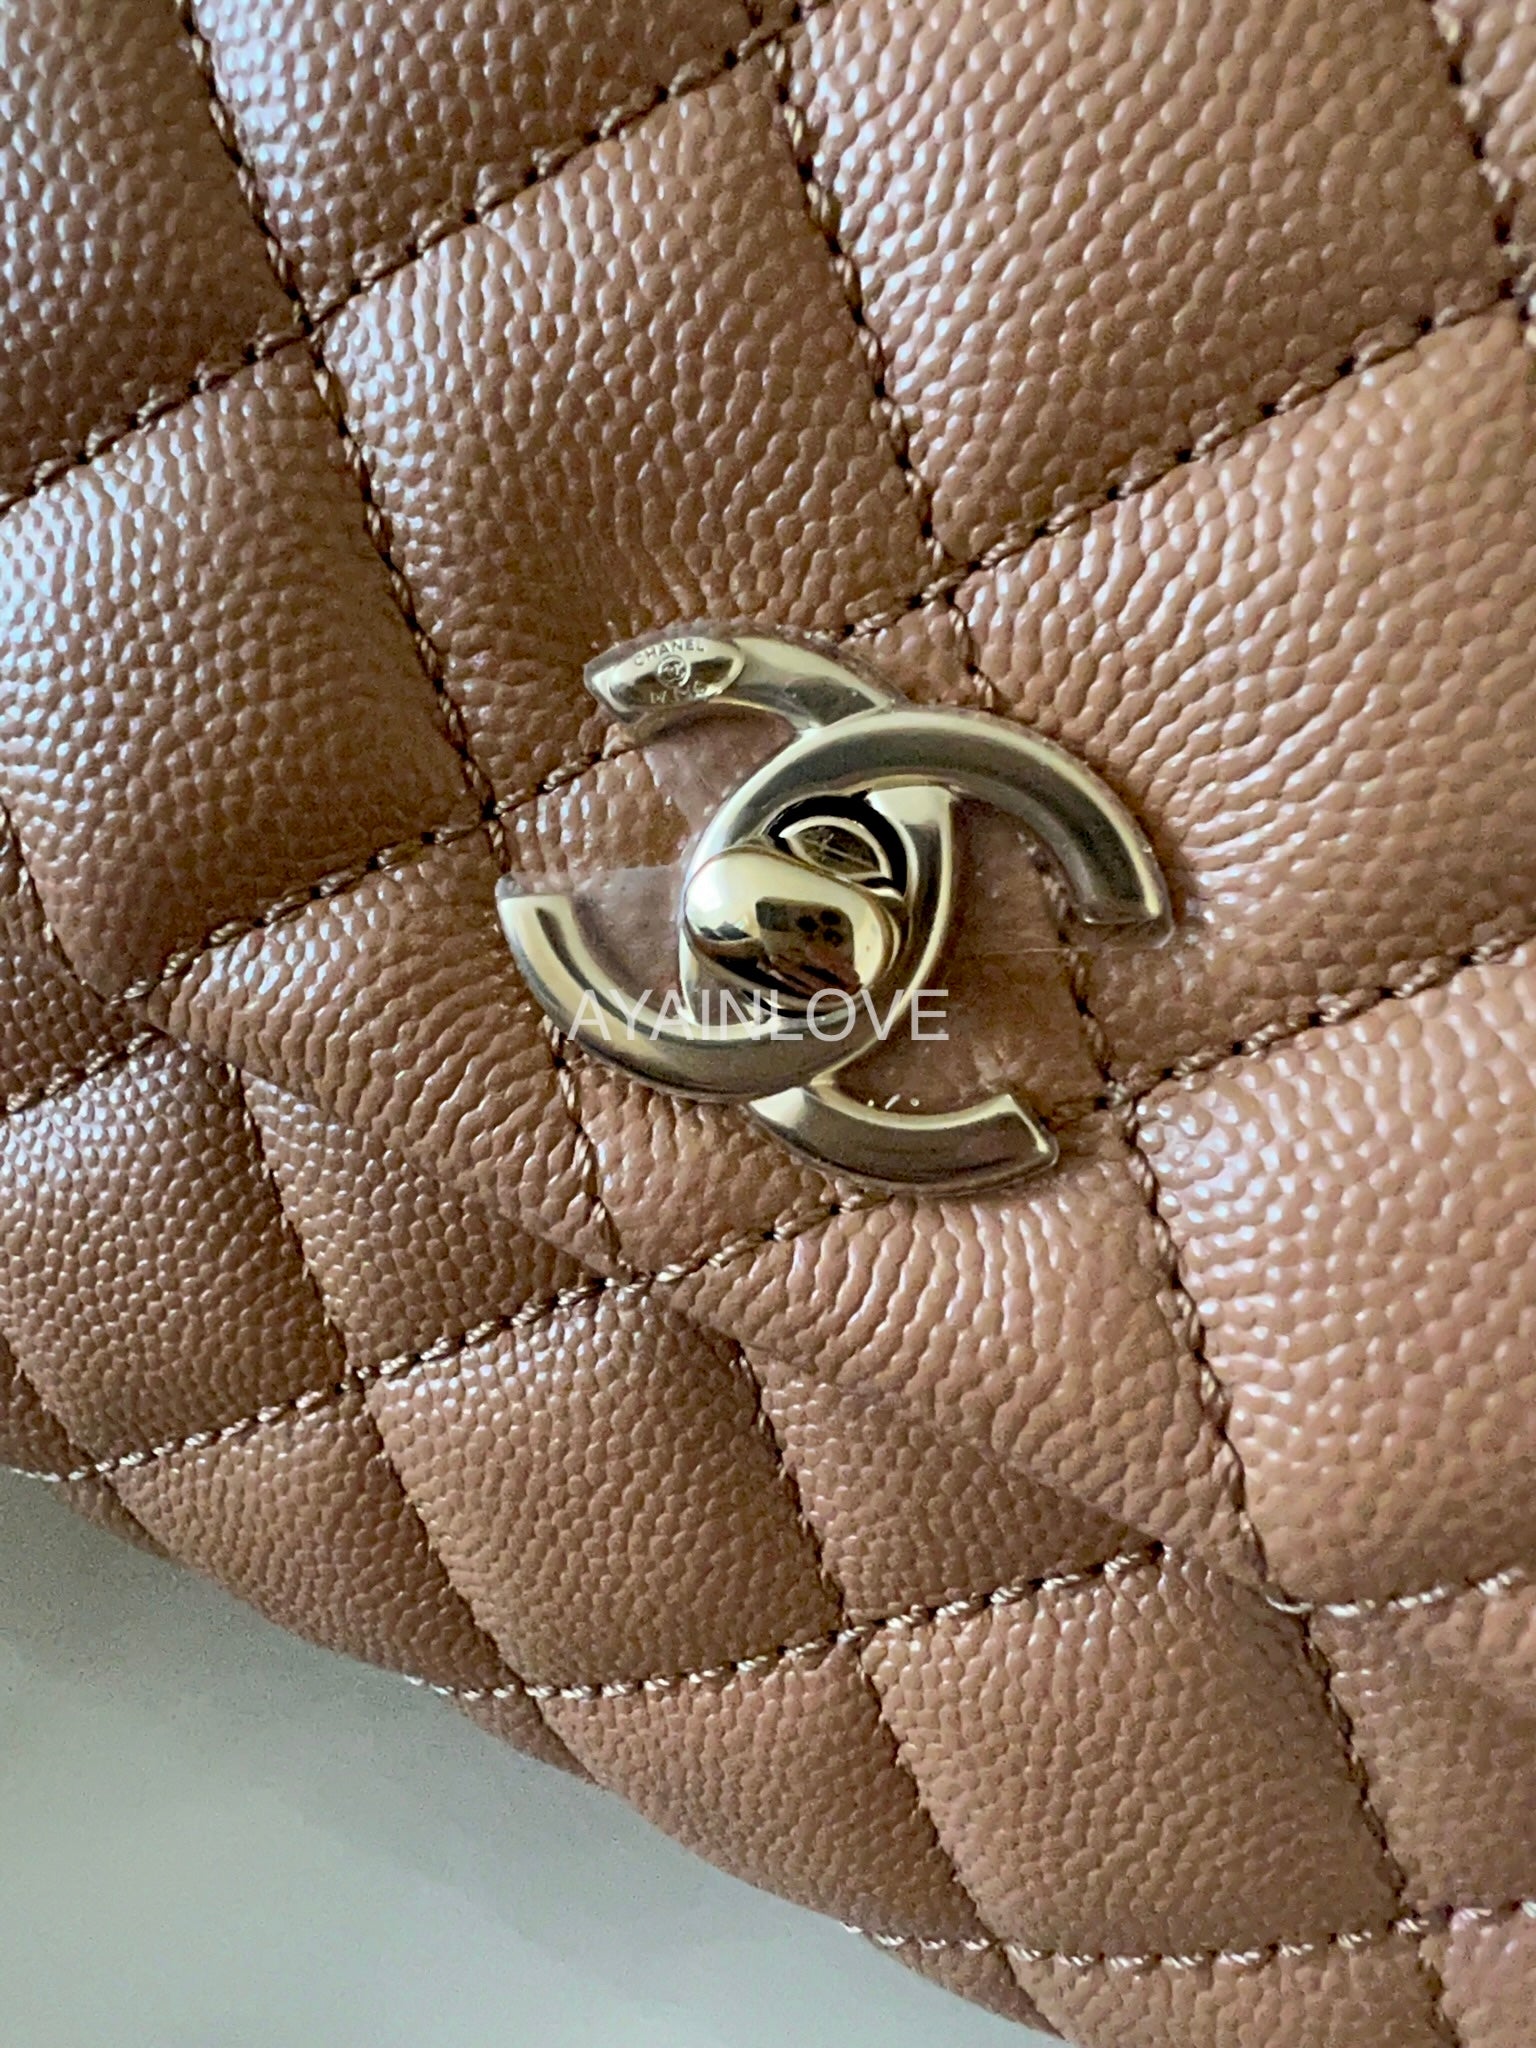 Chanel Dark Brown Quilted Caviar Leather Mini Coco Handle Bag